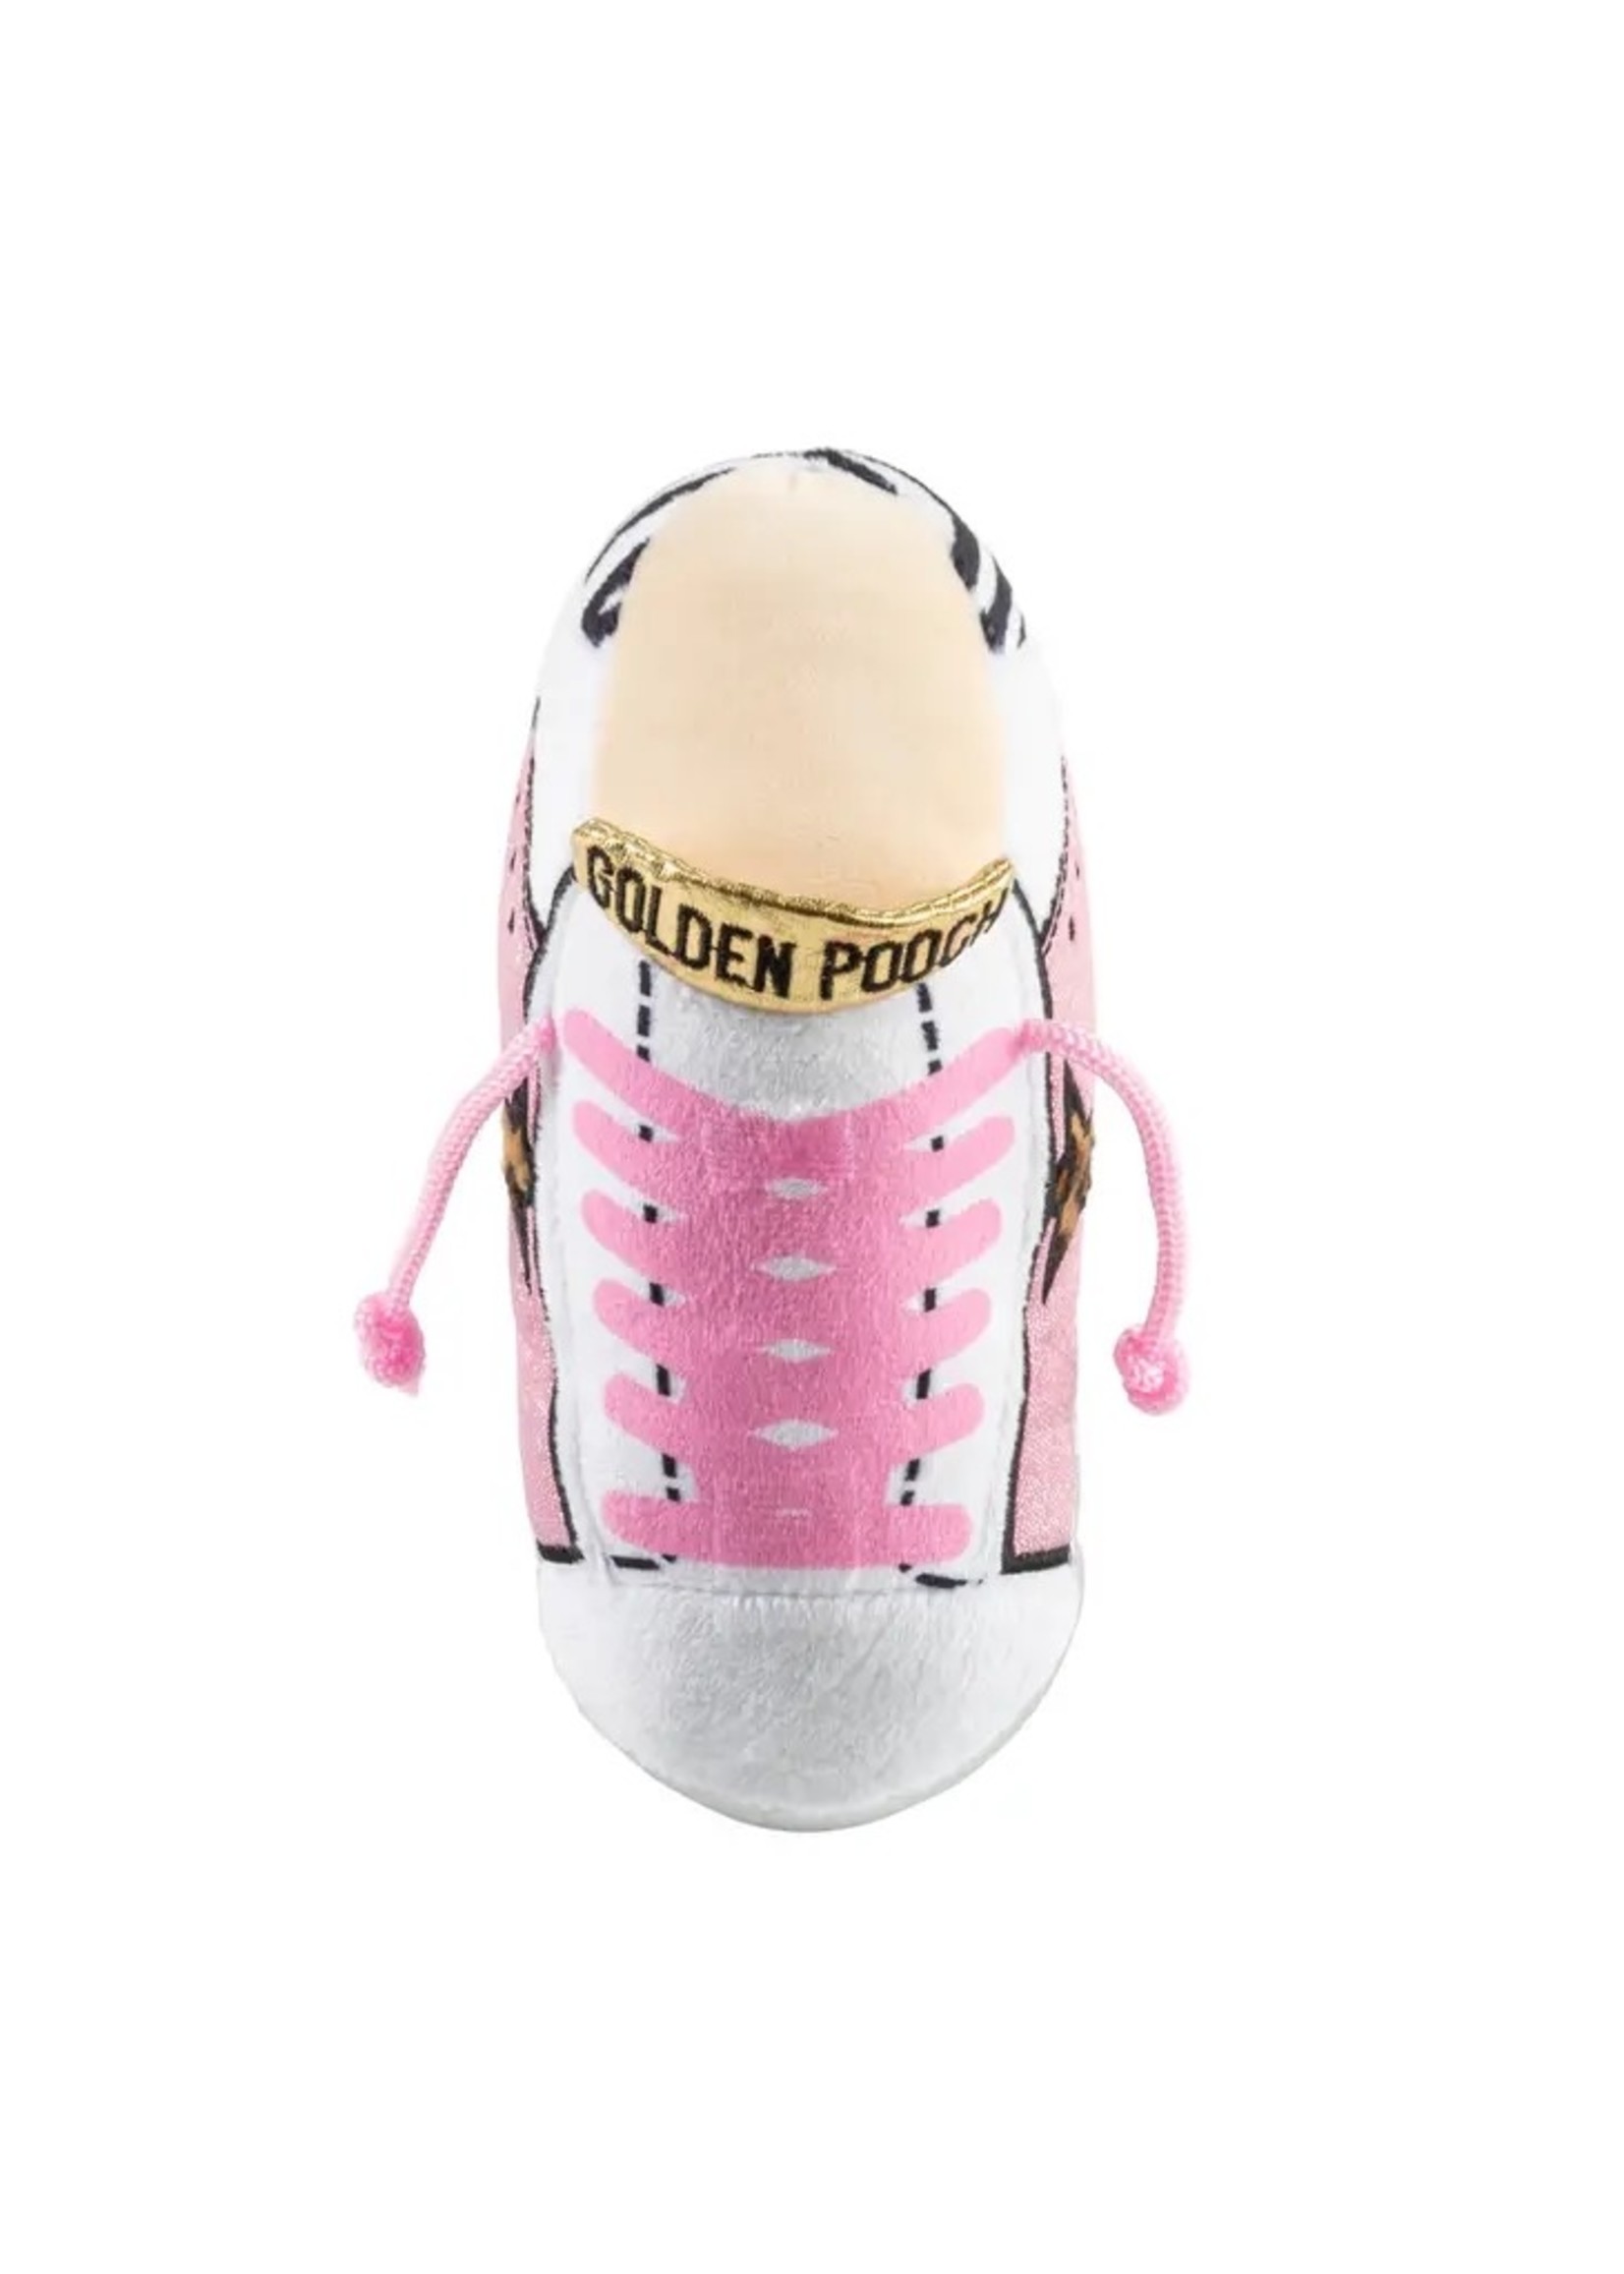 Haute Diggity Dog Golden Pooch Dog Toy - Pink